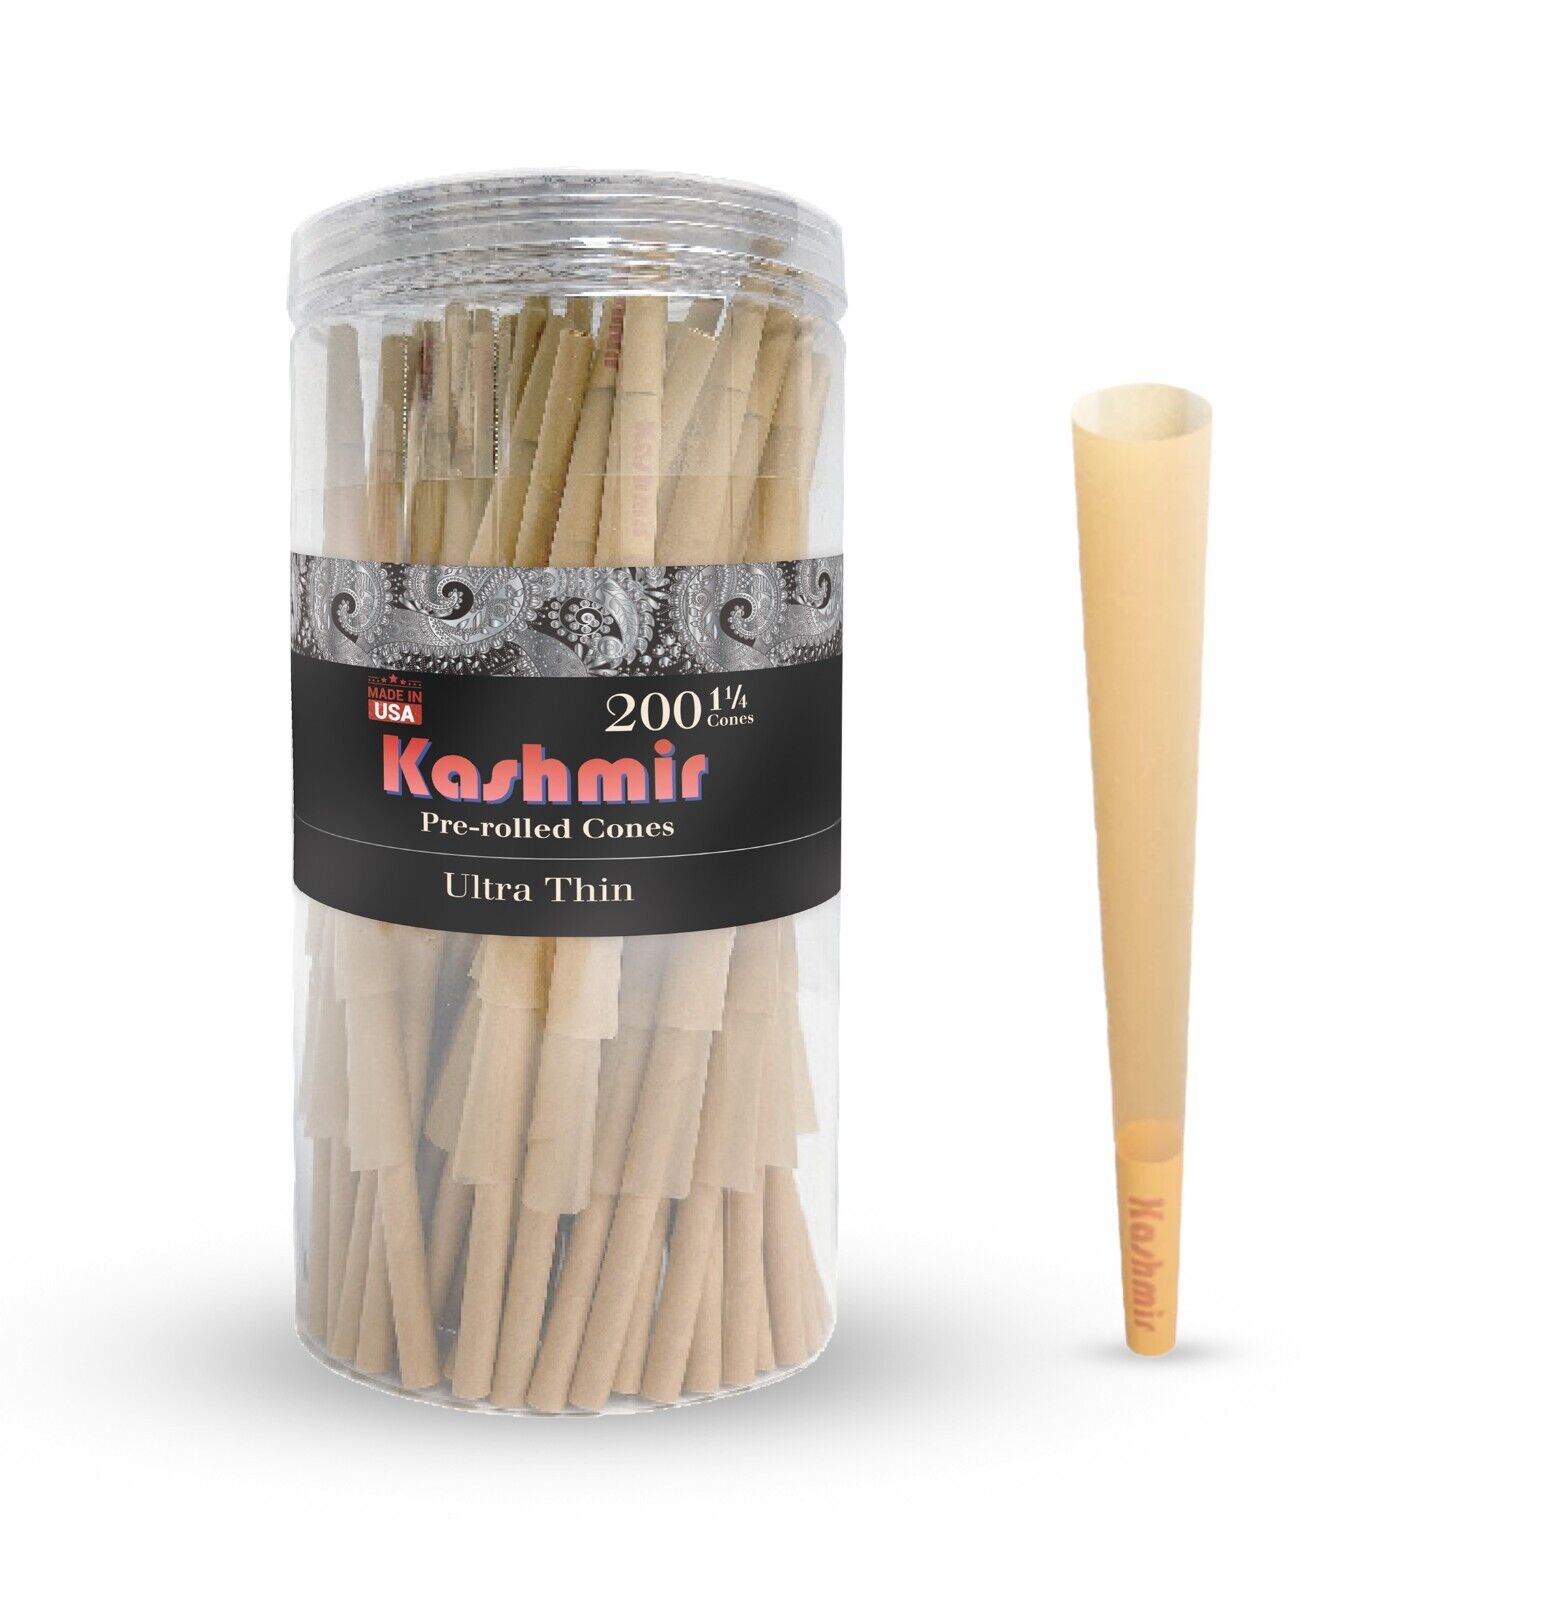 Kashmir Pre Rolled Cones 200 Ct Jar 1 1/4 Size Ultrathin Rolling Papers Cones